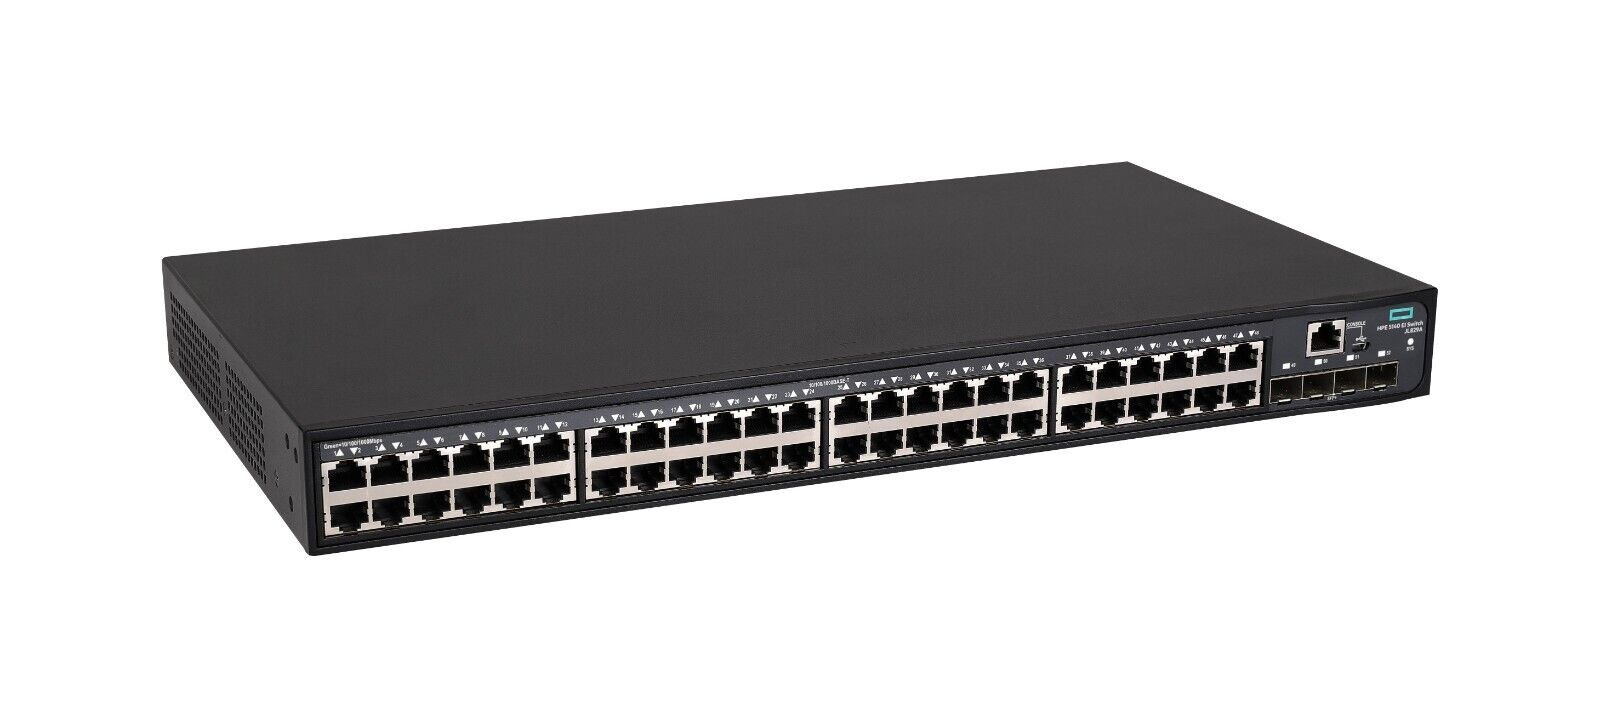 HPE 48 Port Network switch -  FlexNetwork 5140 48G 4SFP+ EI Switch (JL829A) *NEW